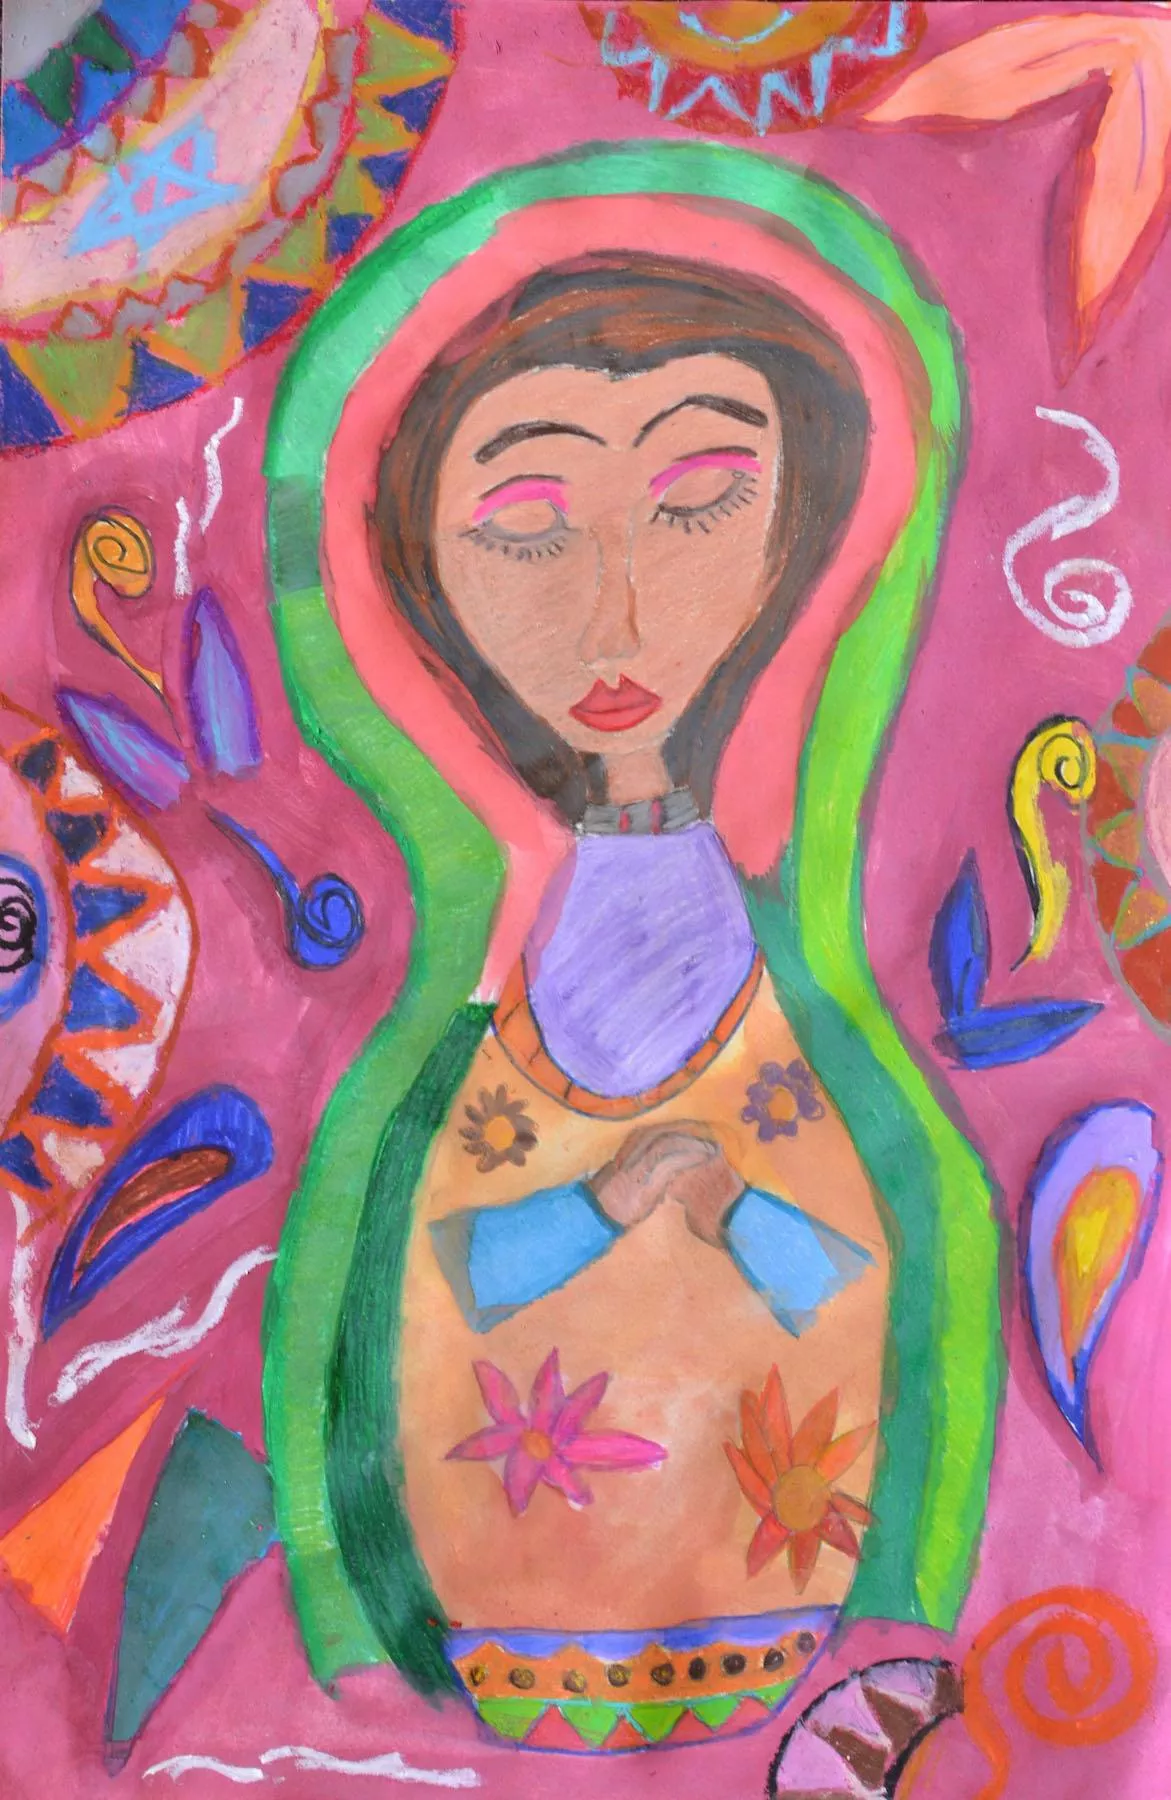 A peanut shaped doll figure, eyes closed and hands together, painted to appear wrapped in a green cloak, sits in the foreground surrounded by a magenta expanse filled with colorful flora & colorfully patterned objects that float around the central figure.